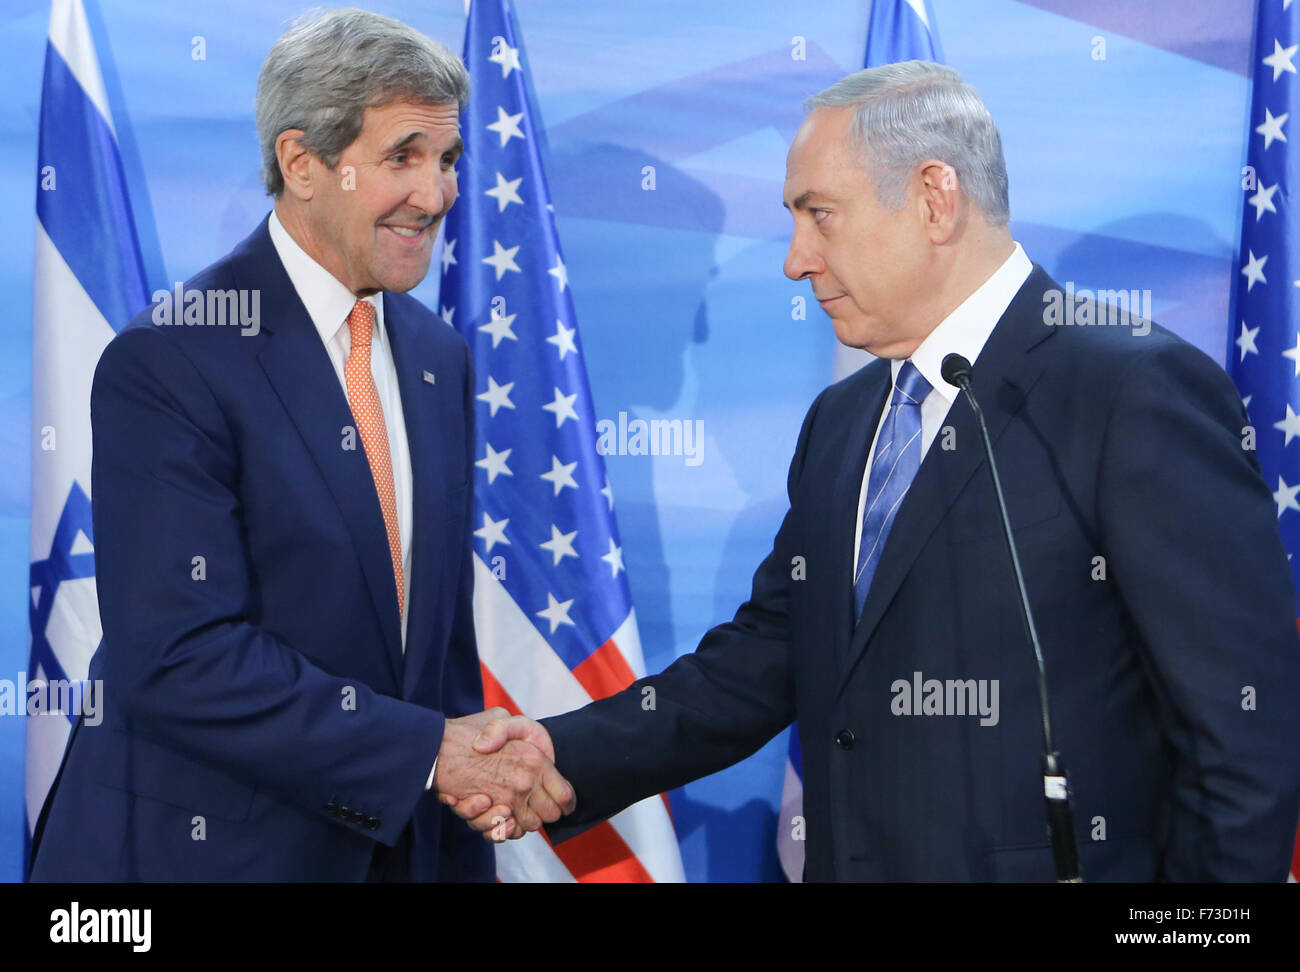 Jerusalem. 24th Nov, 2015. Israeli Prime Minister Benjamin Netanyahu (R) meets with visiting U.S. Secretary of State John Kerry in Jerusalem, on Nov. 24, 2015. Kerry arrived here on Tuesday morning to pay a one-day visit to Israel and the West Bank in hopes of curtailing the two-month long wave of violence. Credit:  JINI/POOL/Alex Kolomoisky/Xinhua/Alamy Live News Stock Photo